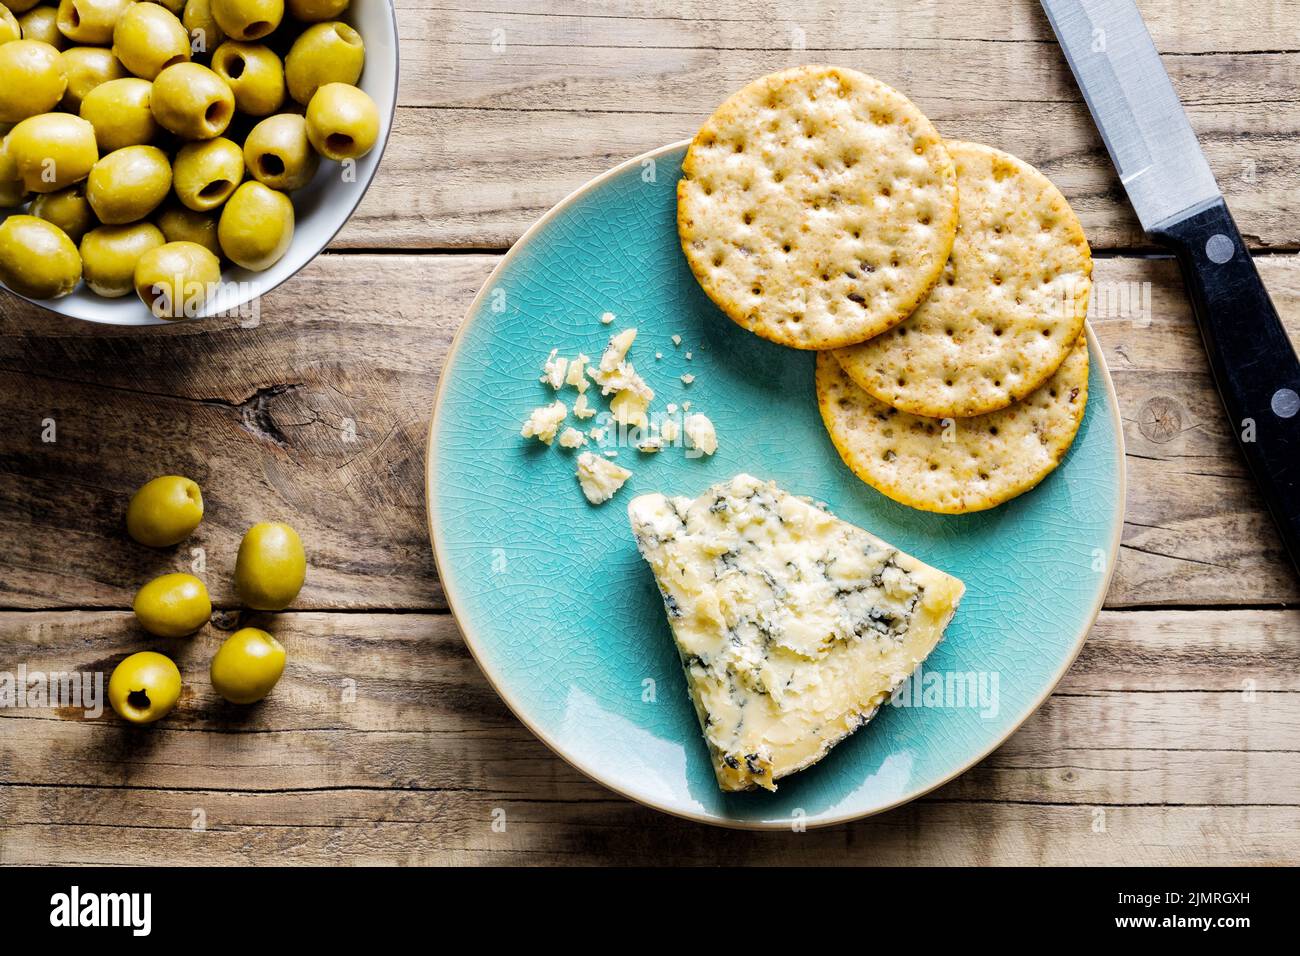 A slice of mature Stilton cheese on a plate with round whole wheat crackers and green olives in a small bowl to the side. A desert size serving Stock Photo